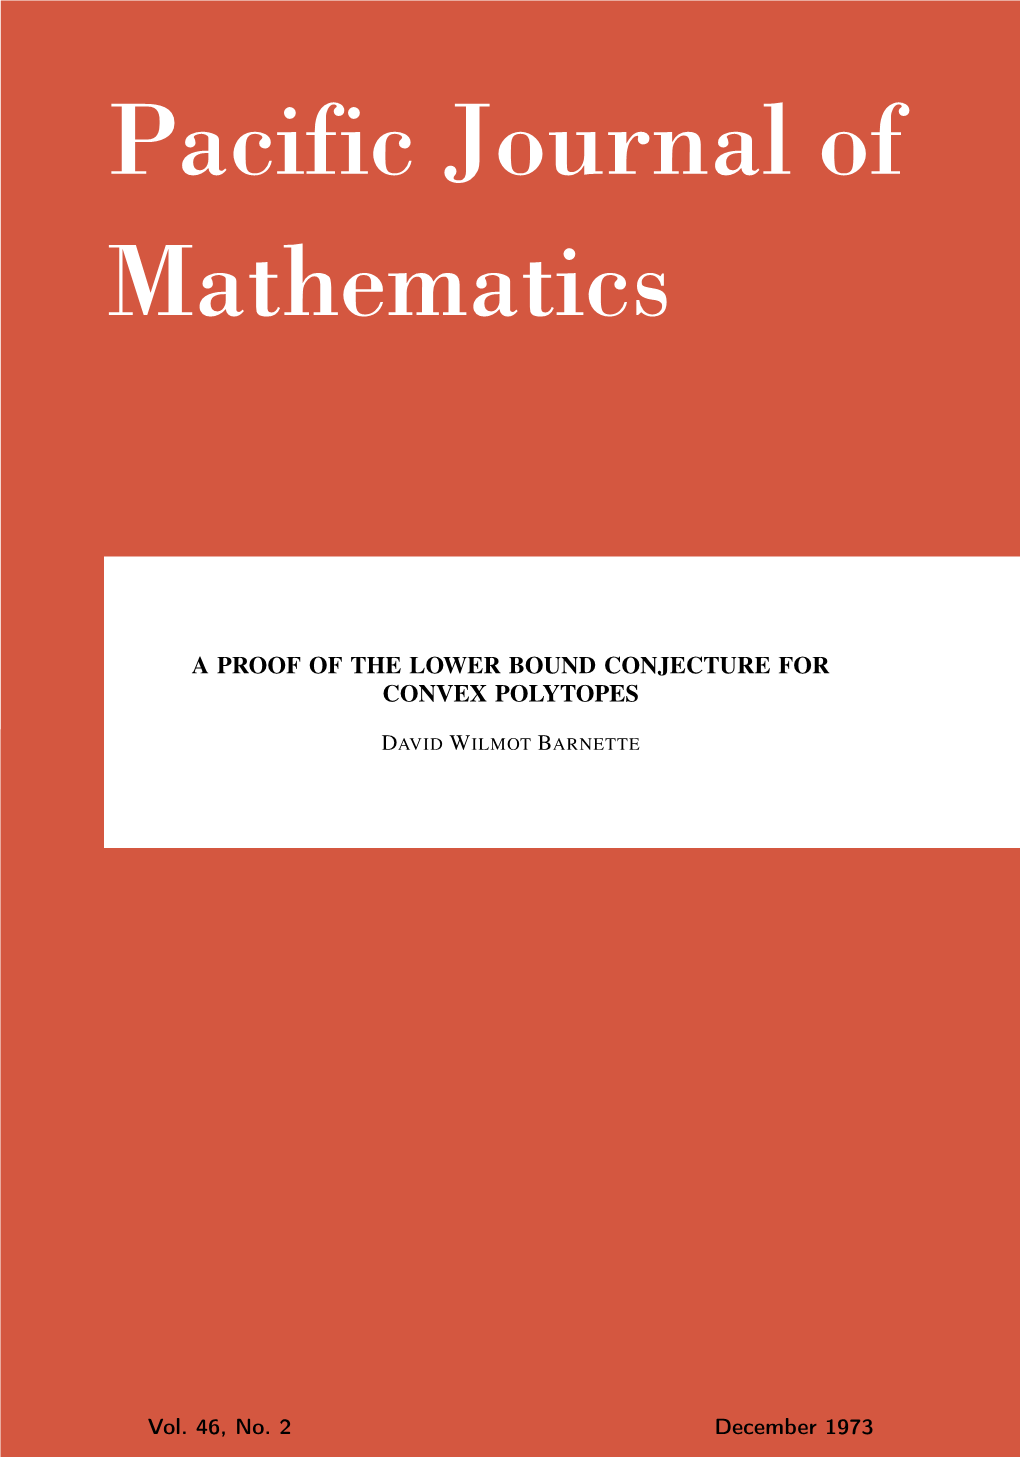 A Proof of the Lower Bound Conjecture for Convex Polytopes